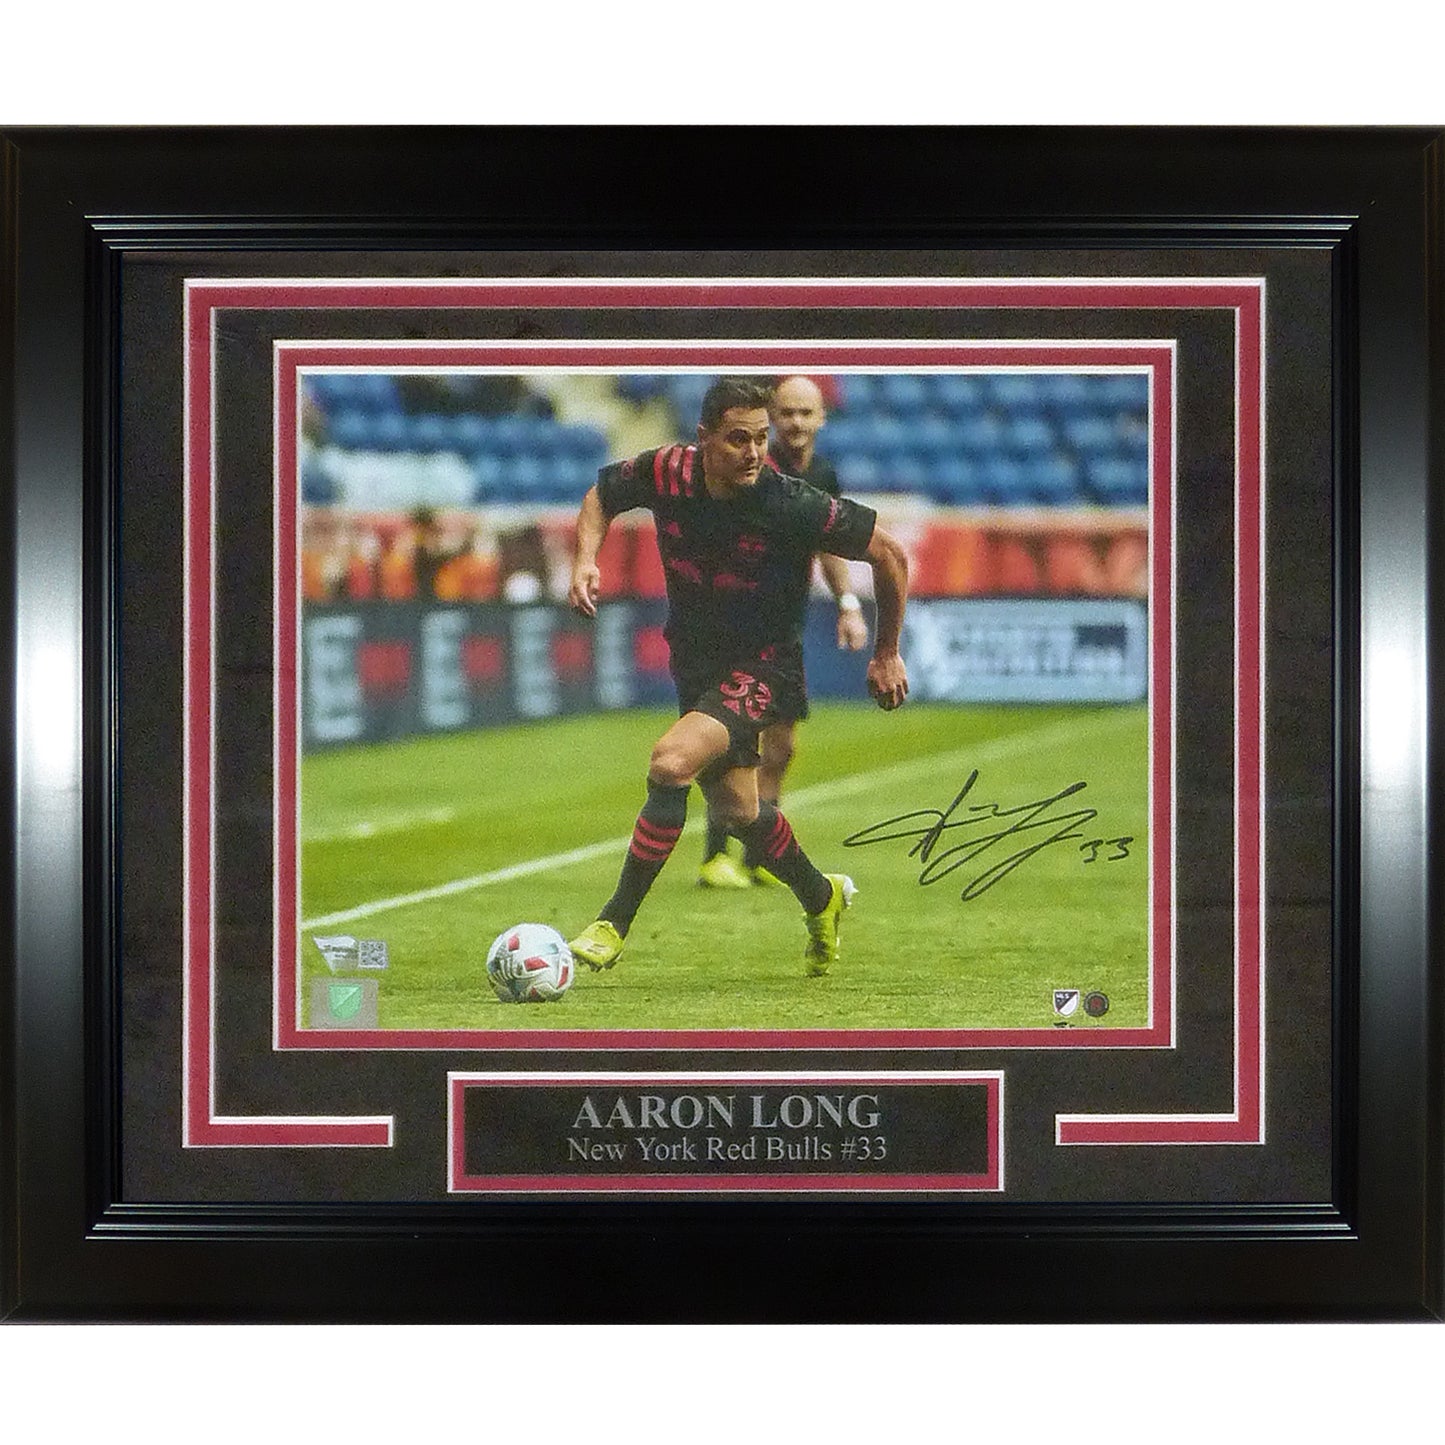 Aaron Long Autographed New York Red Bulls Deluxe Framed 8x10 Photo Fanatics